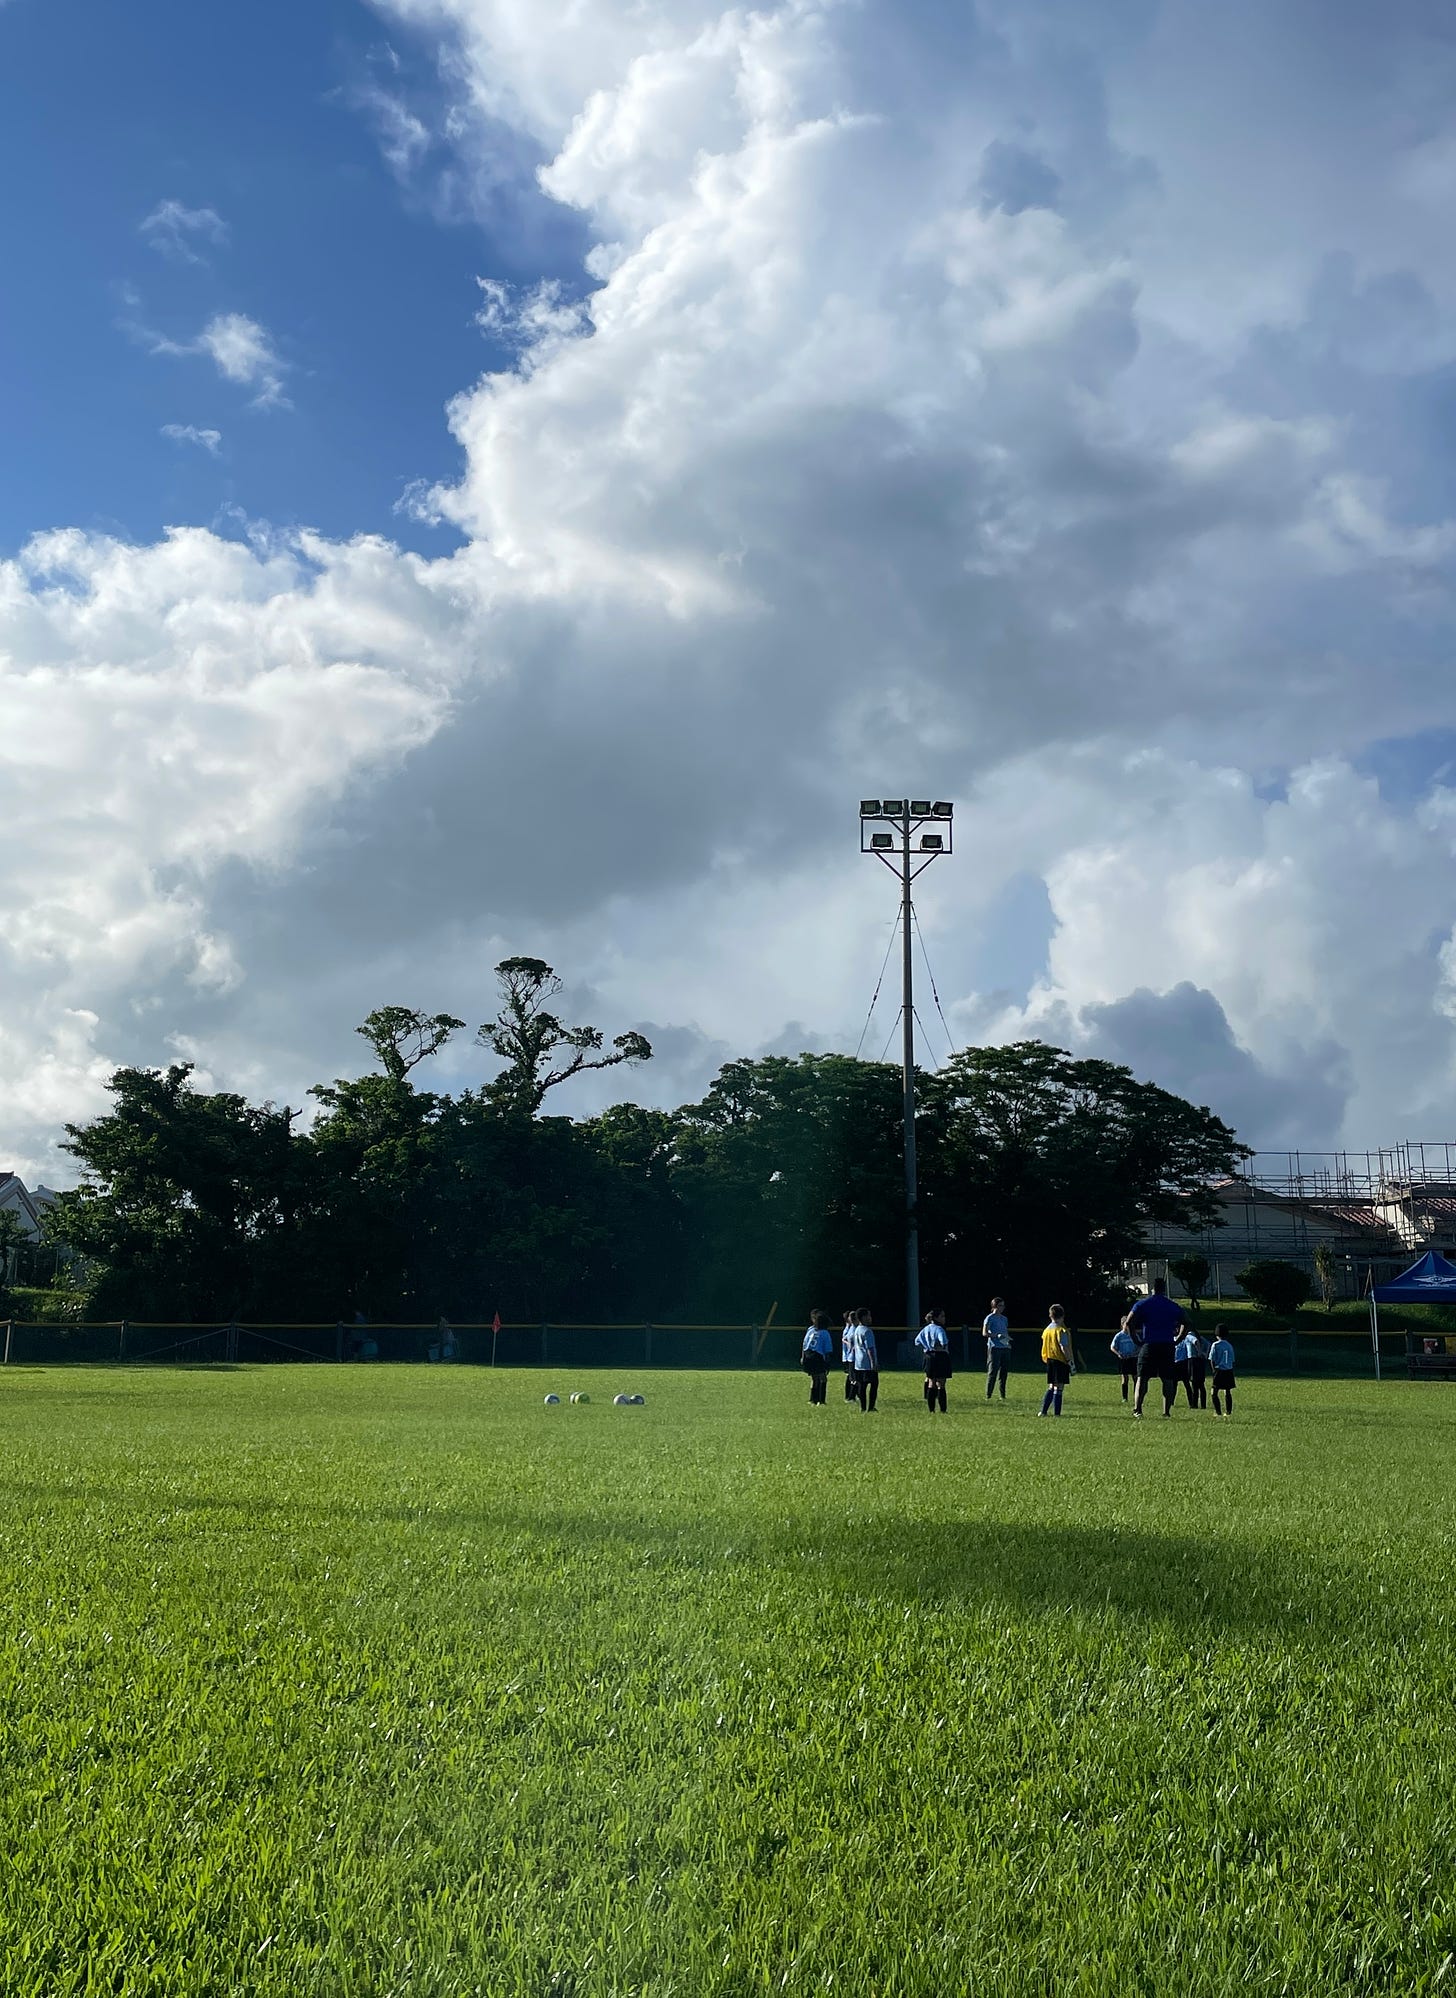 A picture of a soccer team about to play